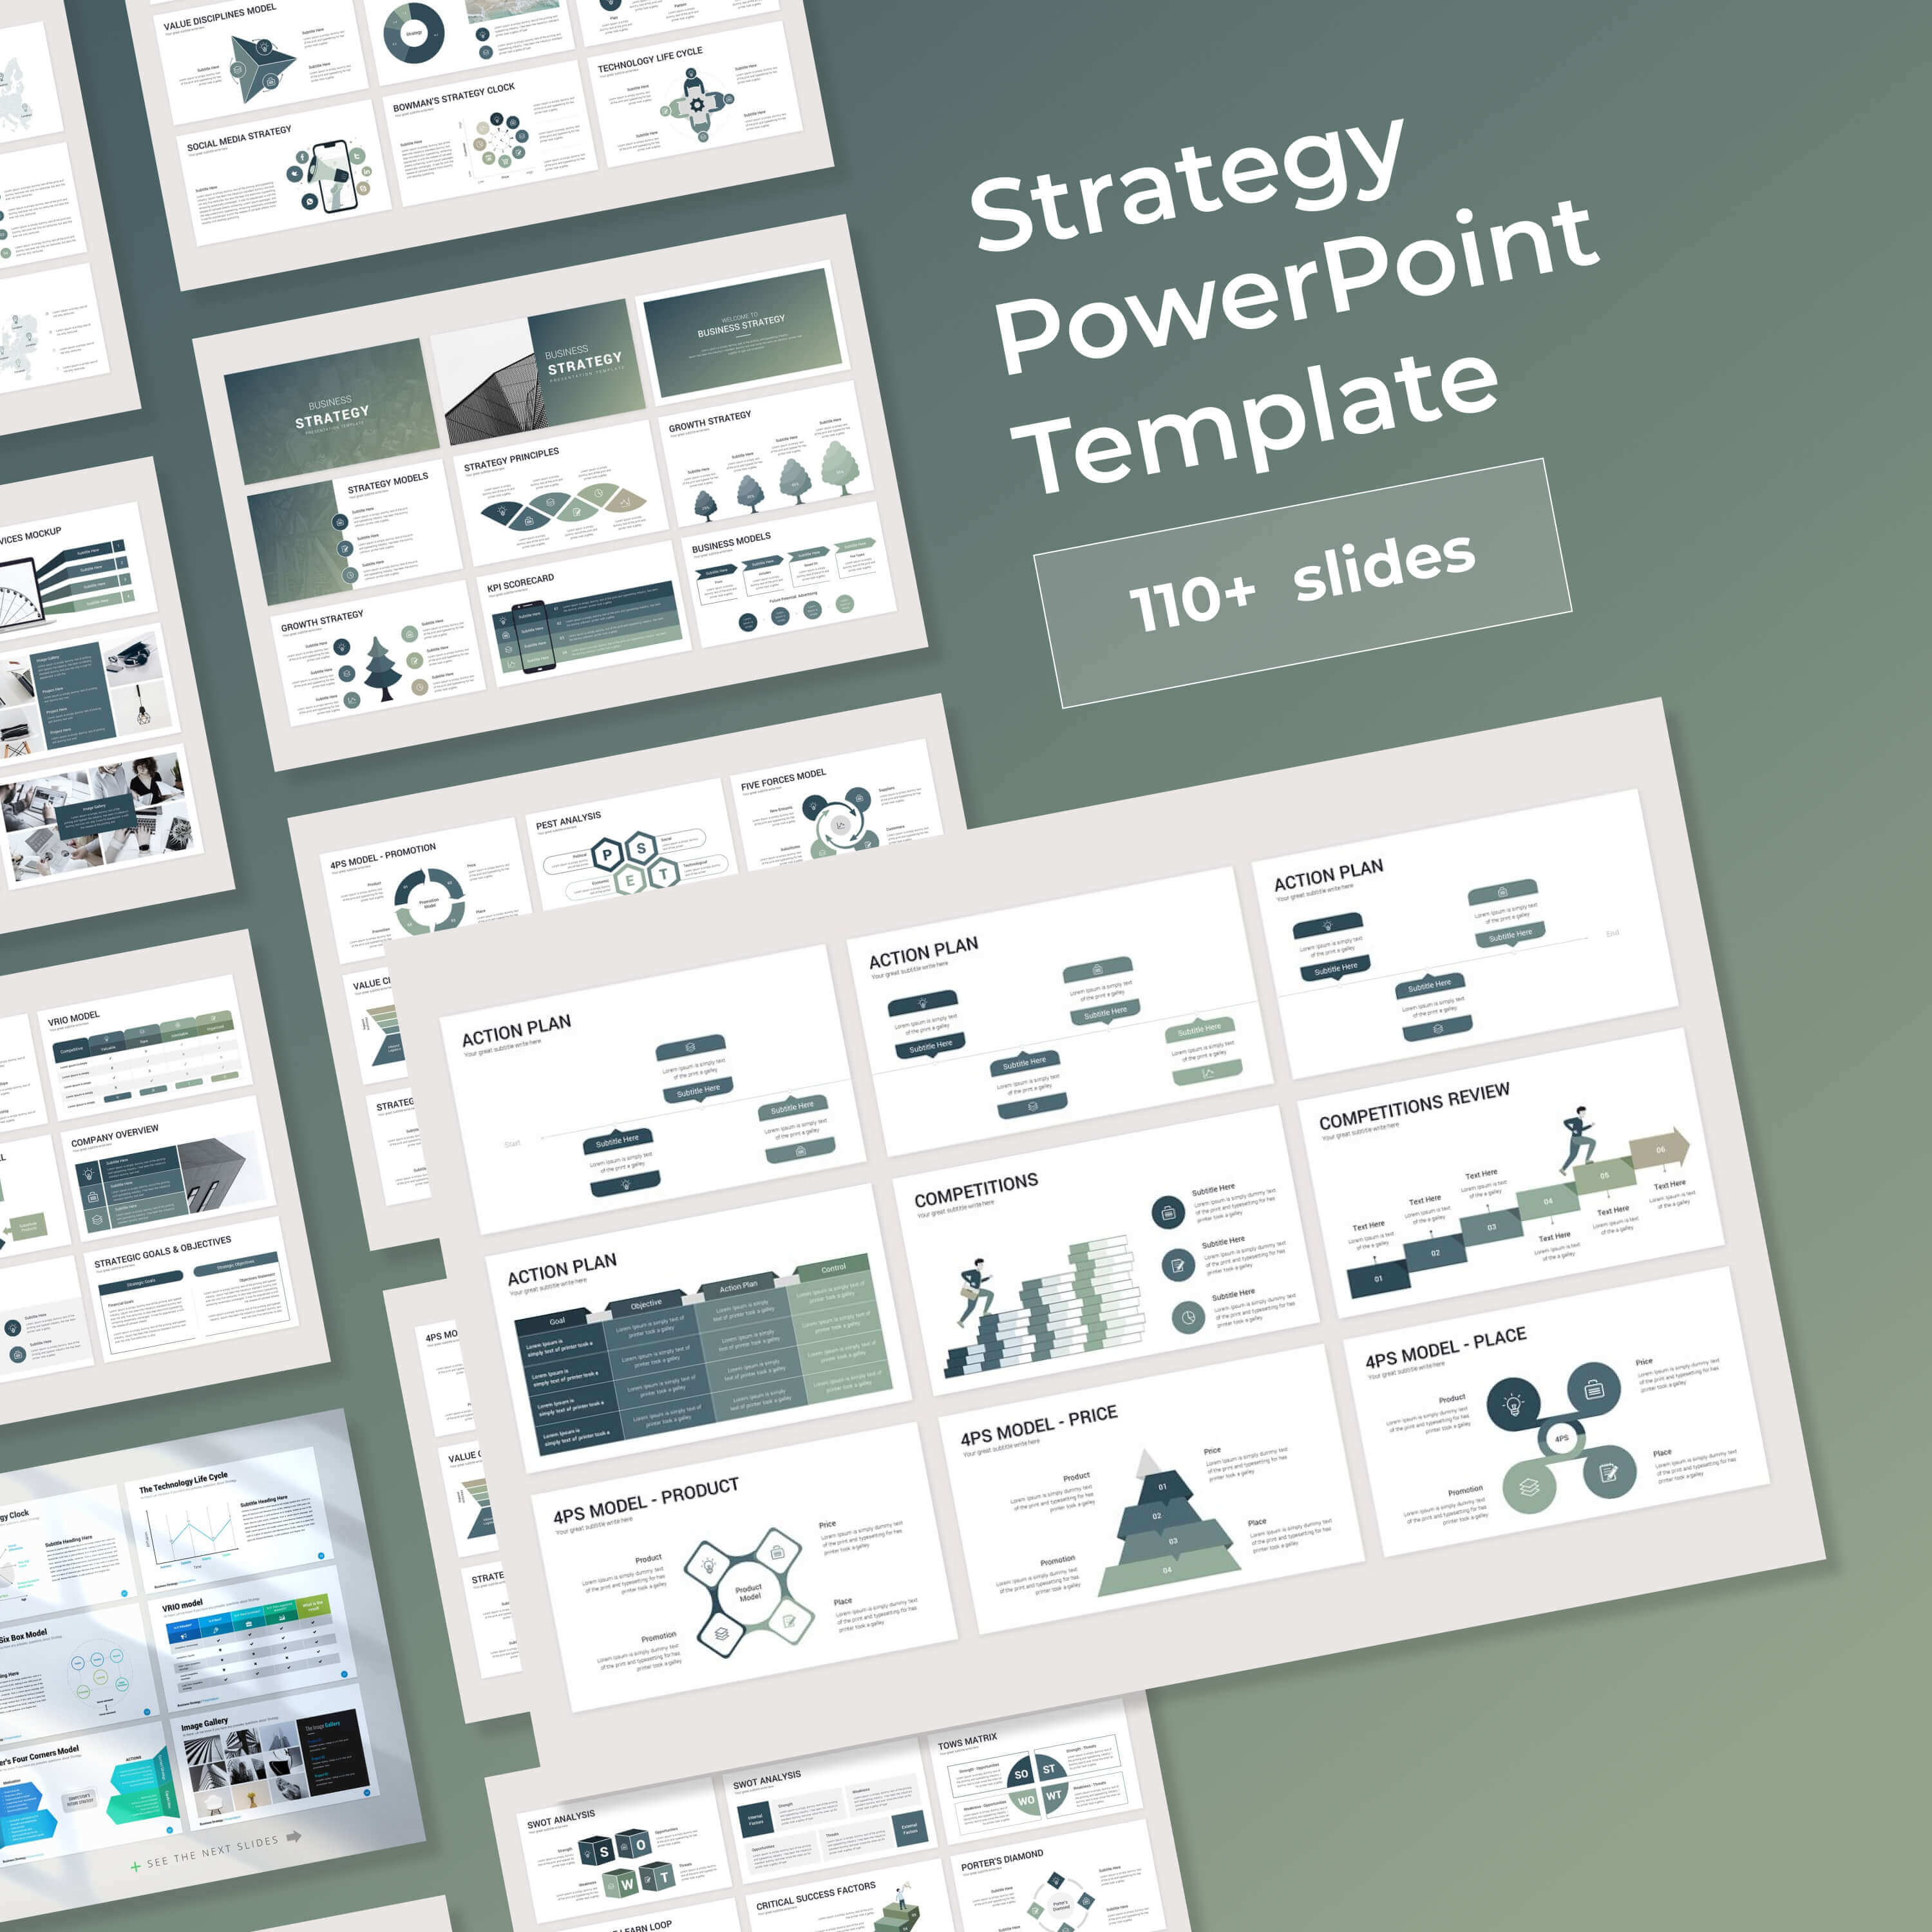 110 Plus Slides of Strategy Powerpoint Template.